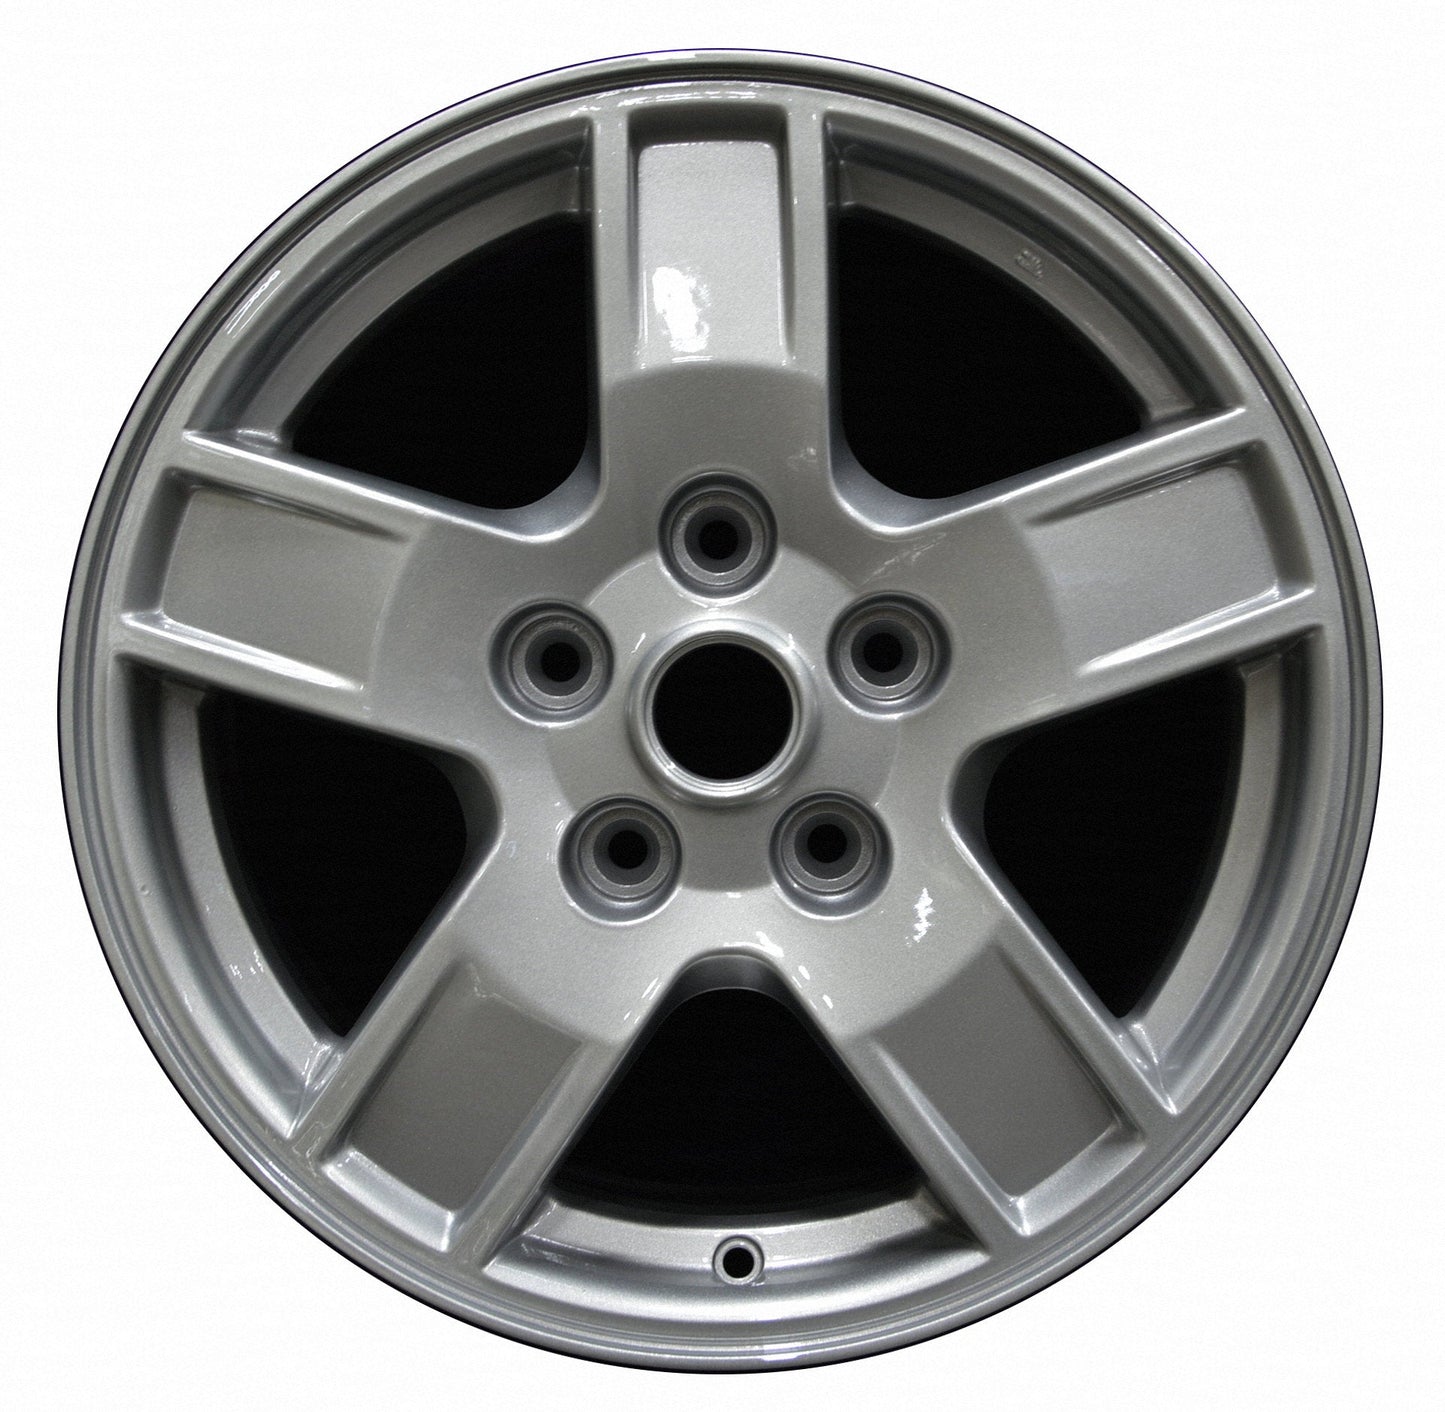 Jeep Grand Cherokee  2005, 2006, 2007 Factory OEM Car Wheel Size 17x7.5 Alloy WAO.9053.PS02.FF